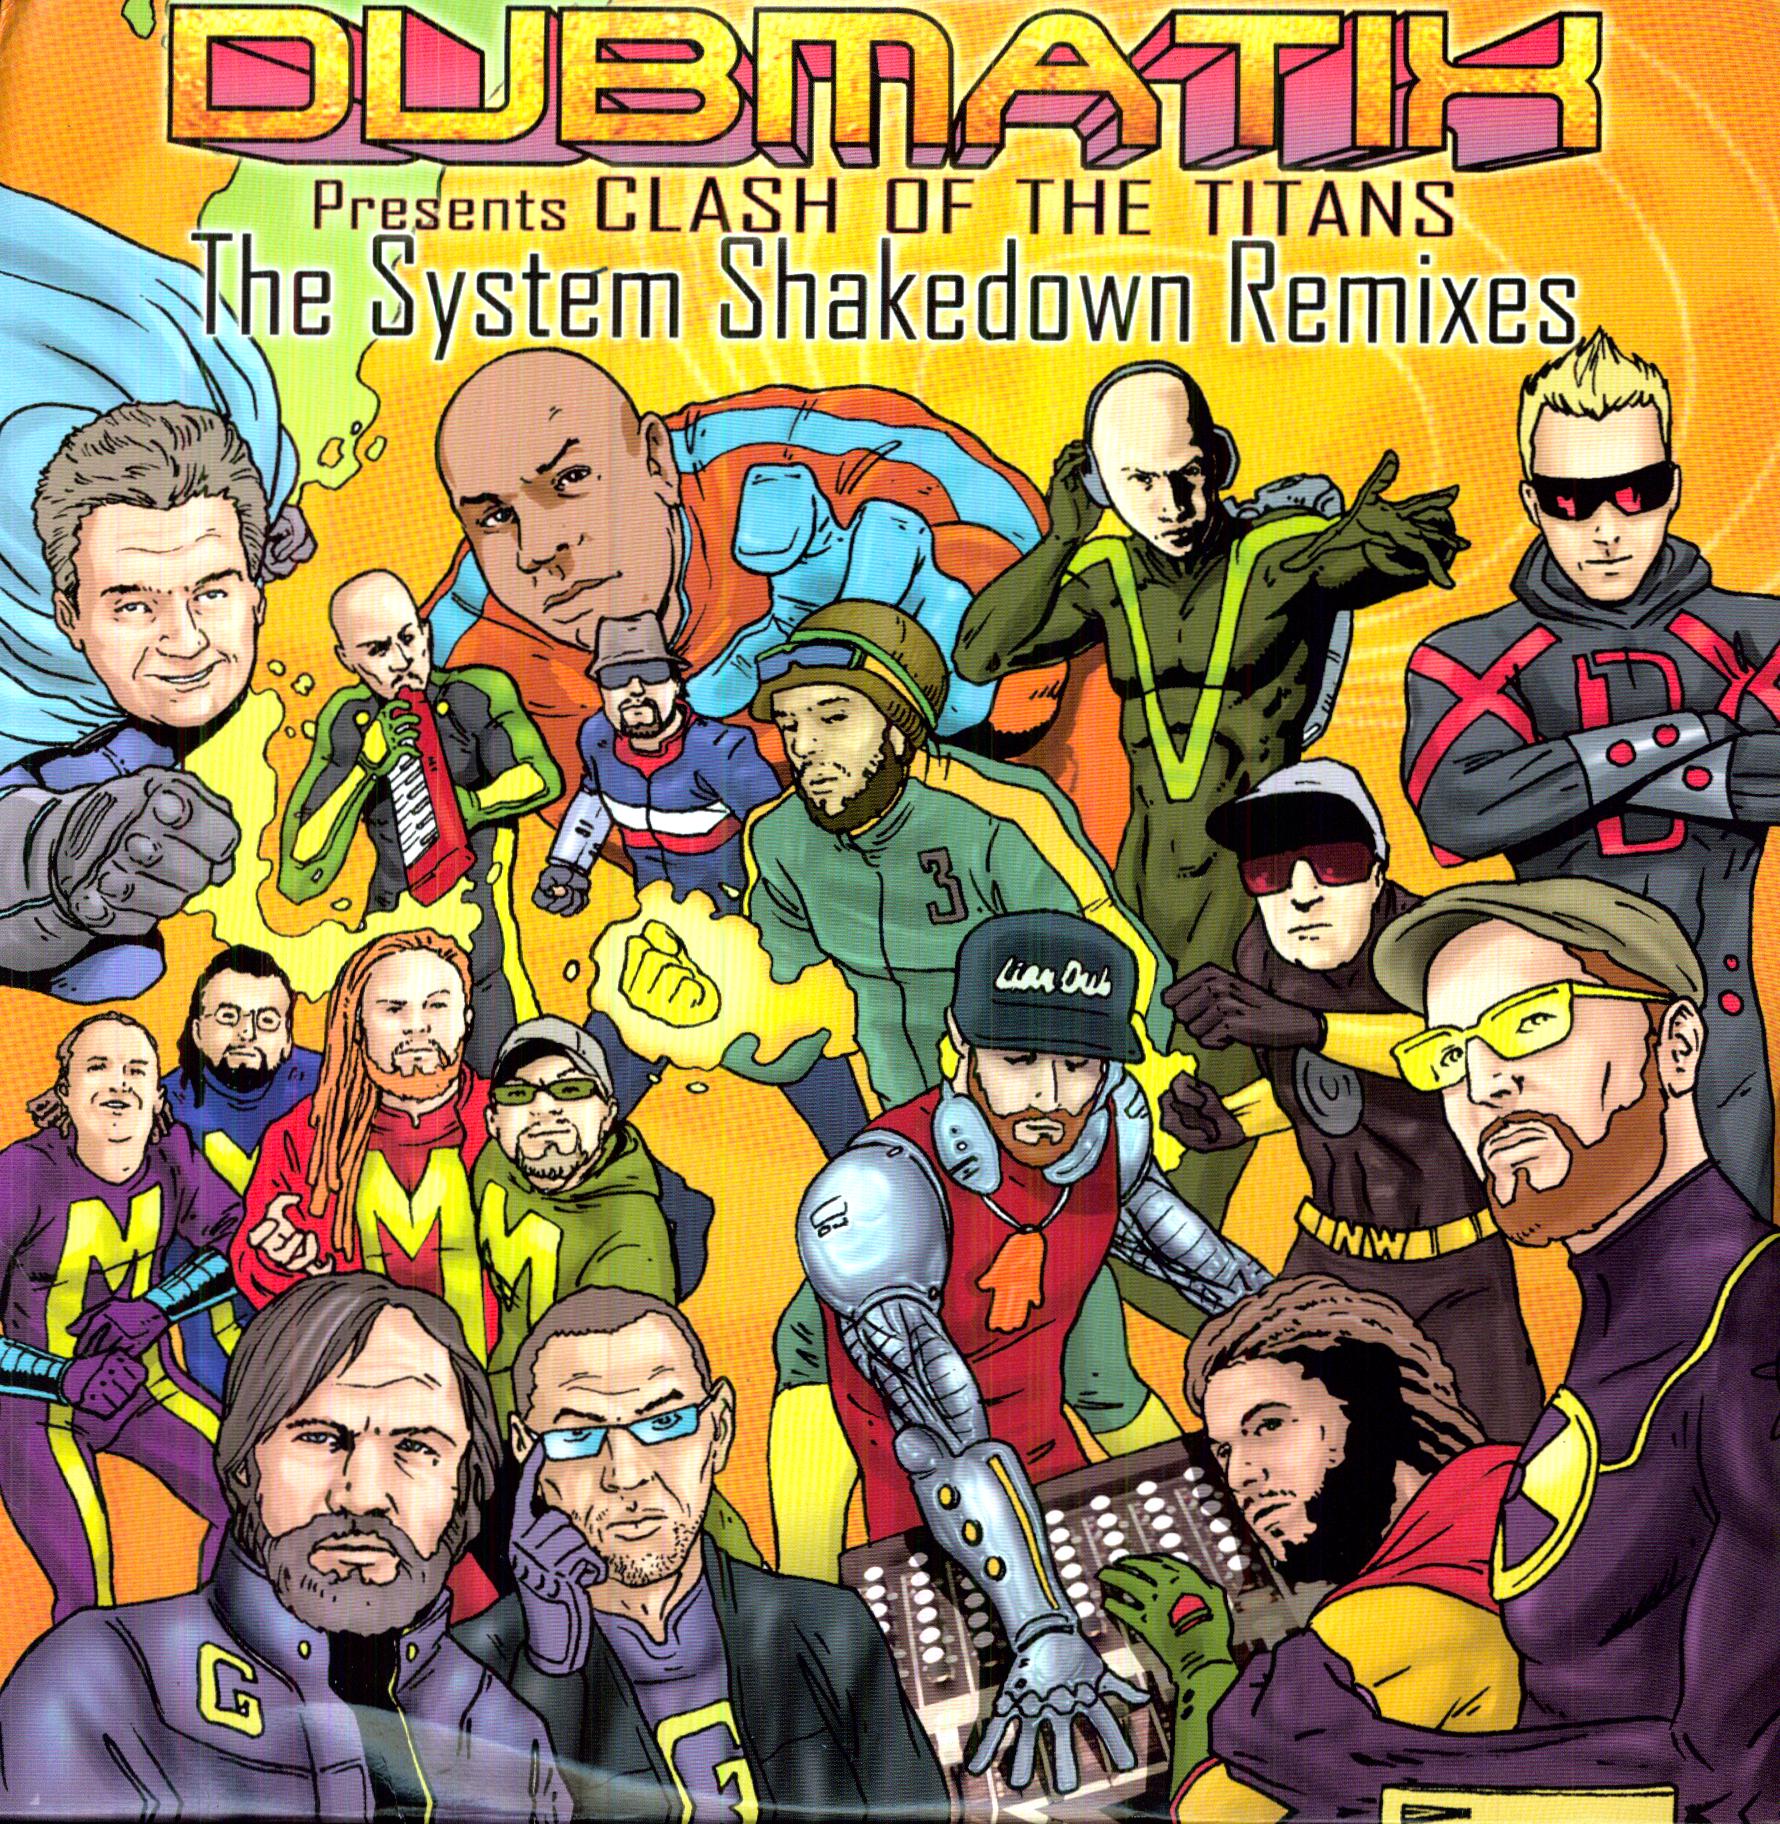 CLASH OF THE TITANS: SYSTEM SHAKEDOWN REMIXES